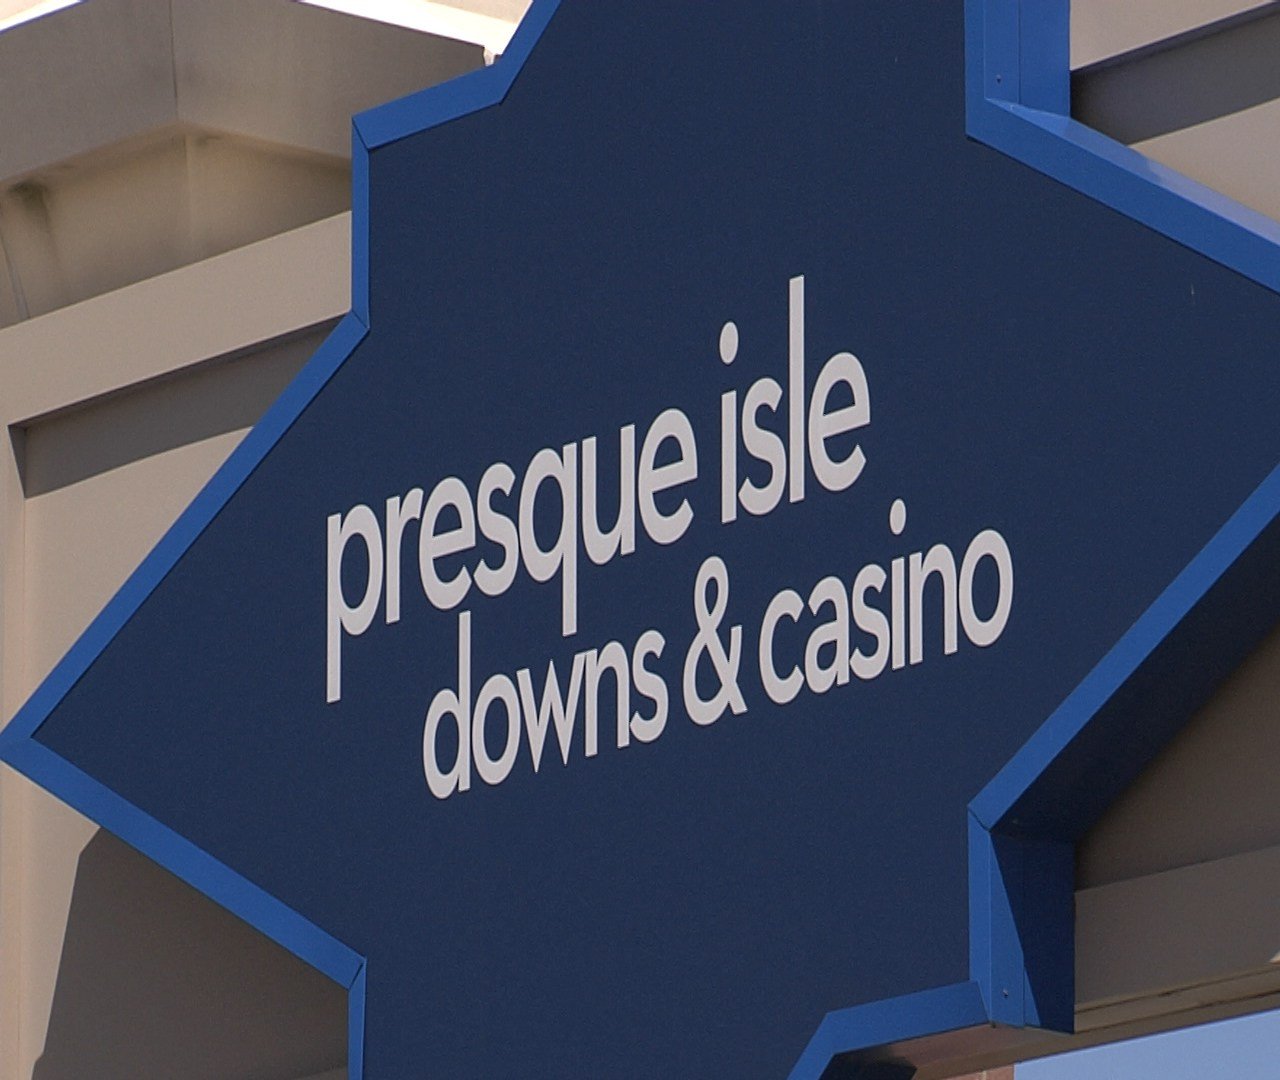 Pair Banned after Leaving Kids in Vehicle at Presque Isle Downs and Casino